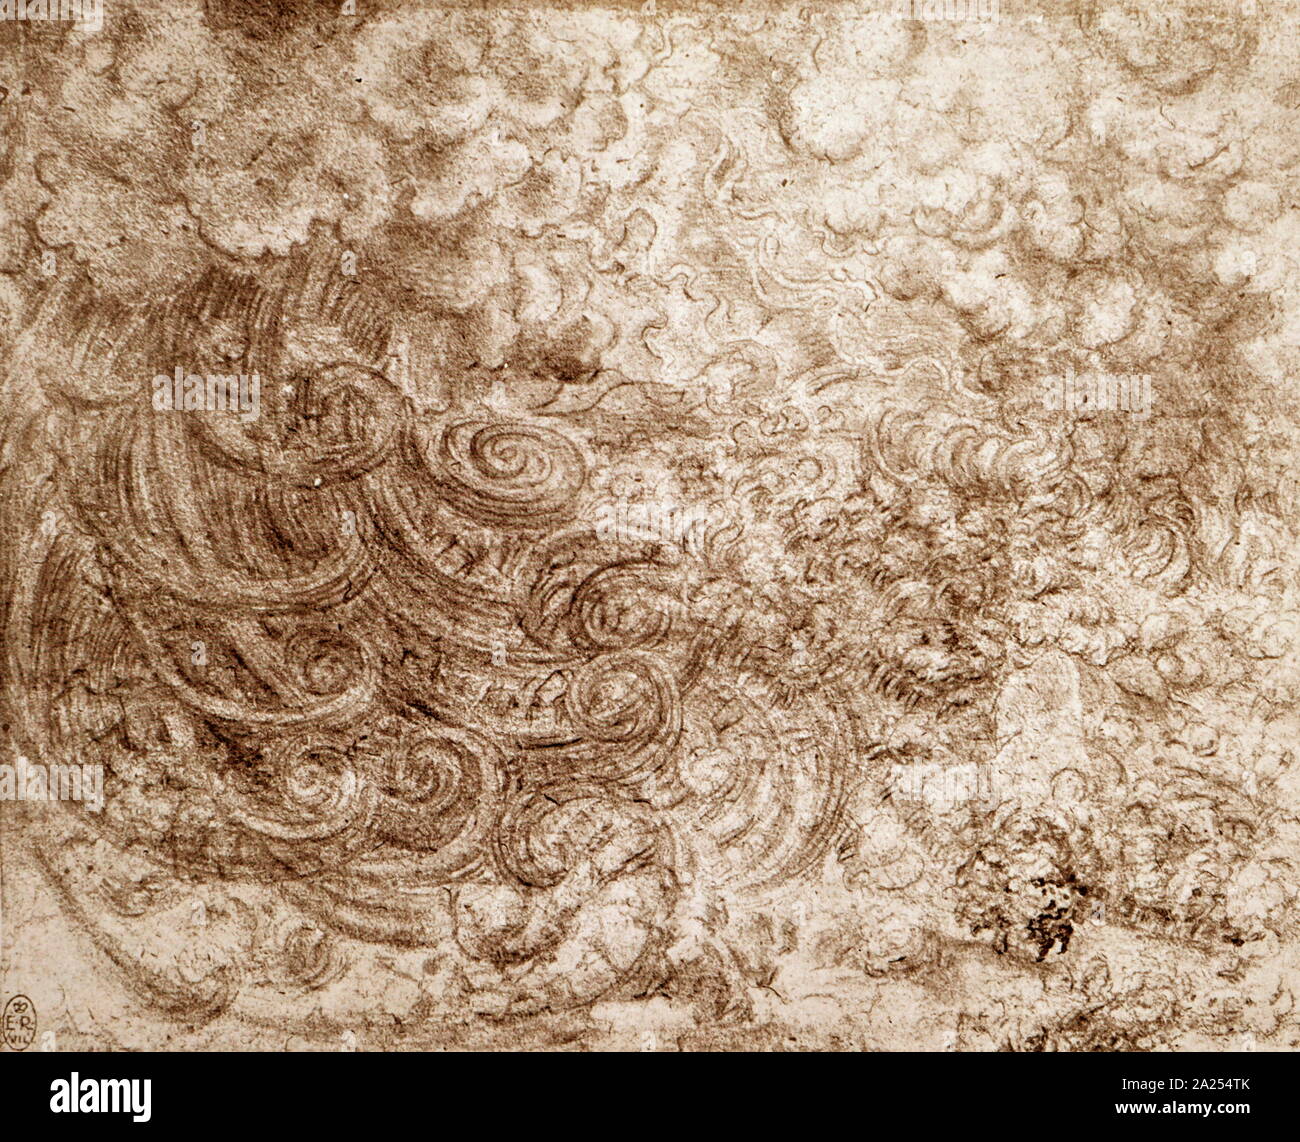 The Deluge VII. Coils of Lightening and rain; Black chalk. Circa 1514-16. By Leonardo da Vinci (1452 - 1519), an Italian Renaissance polymath. Da Vinci was expert in invention, painting, architecture, science and engineering. considered one of the greatest Stock Photo